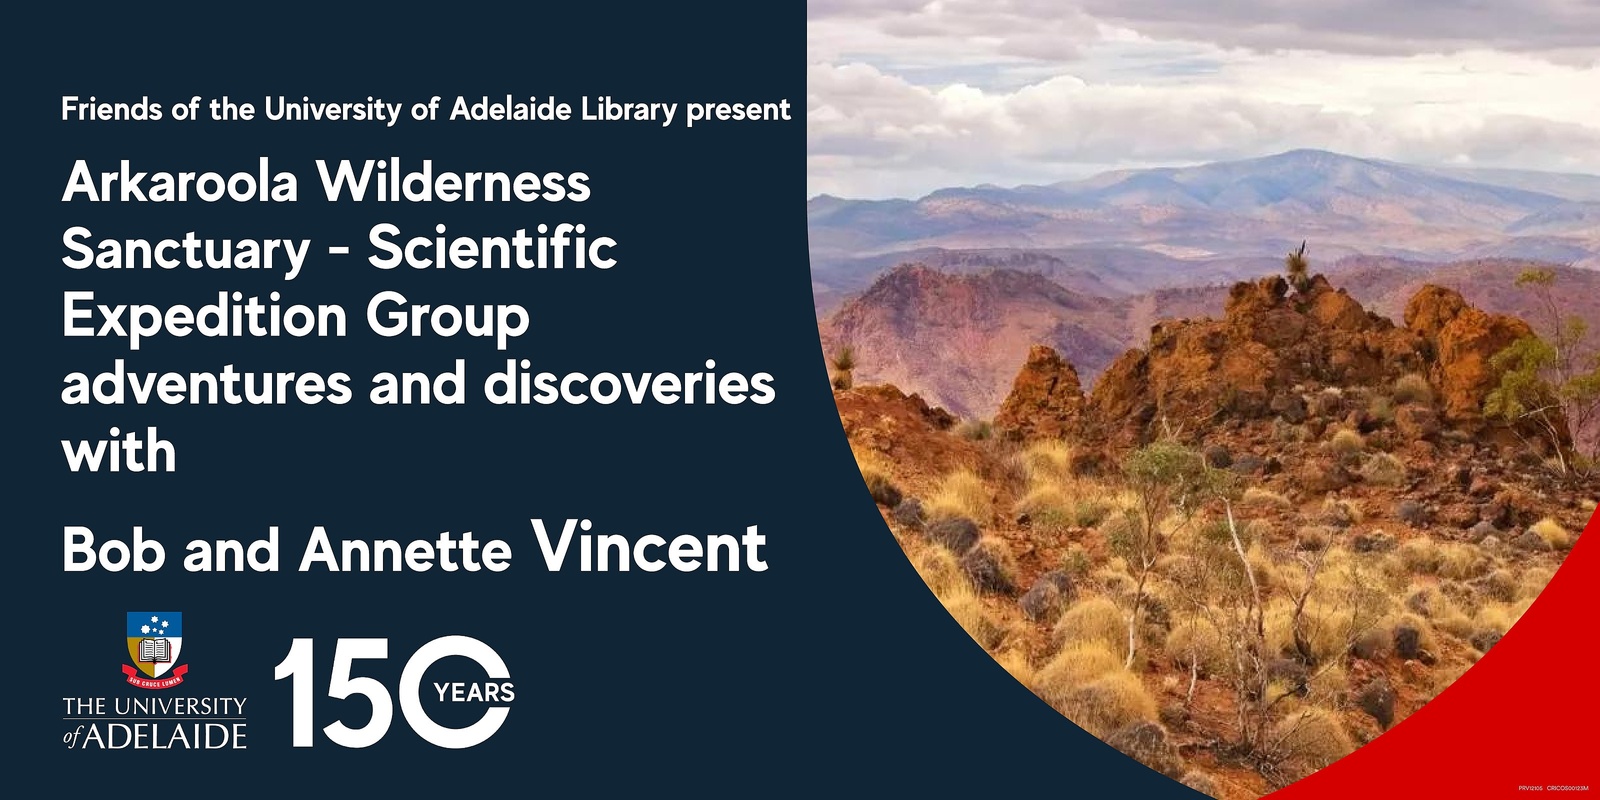 Banner image for Arkaroola Wilderness Sanctuary - Scientific Expedition Group adventures and discoveries with Bob and Annette Vincent.